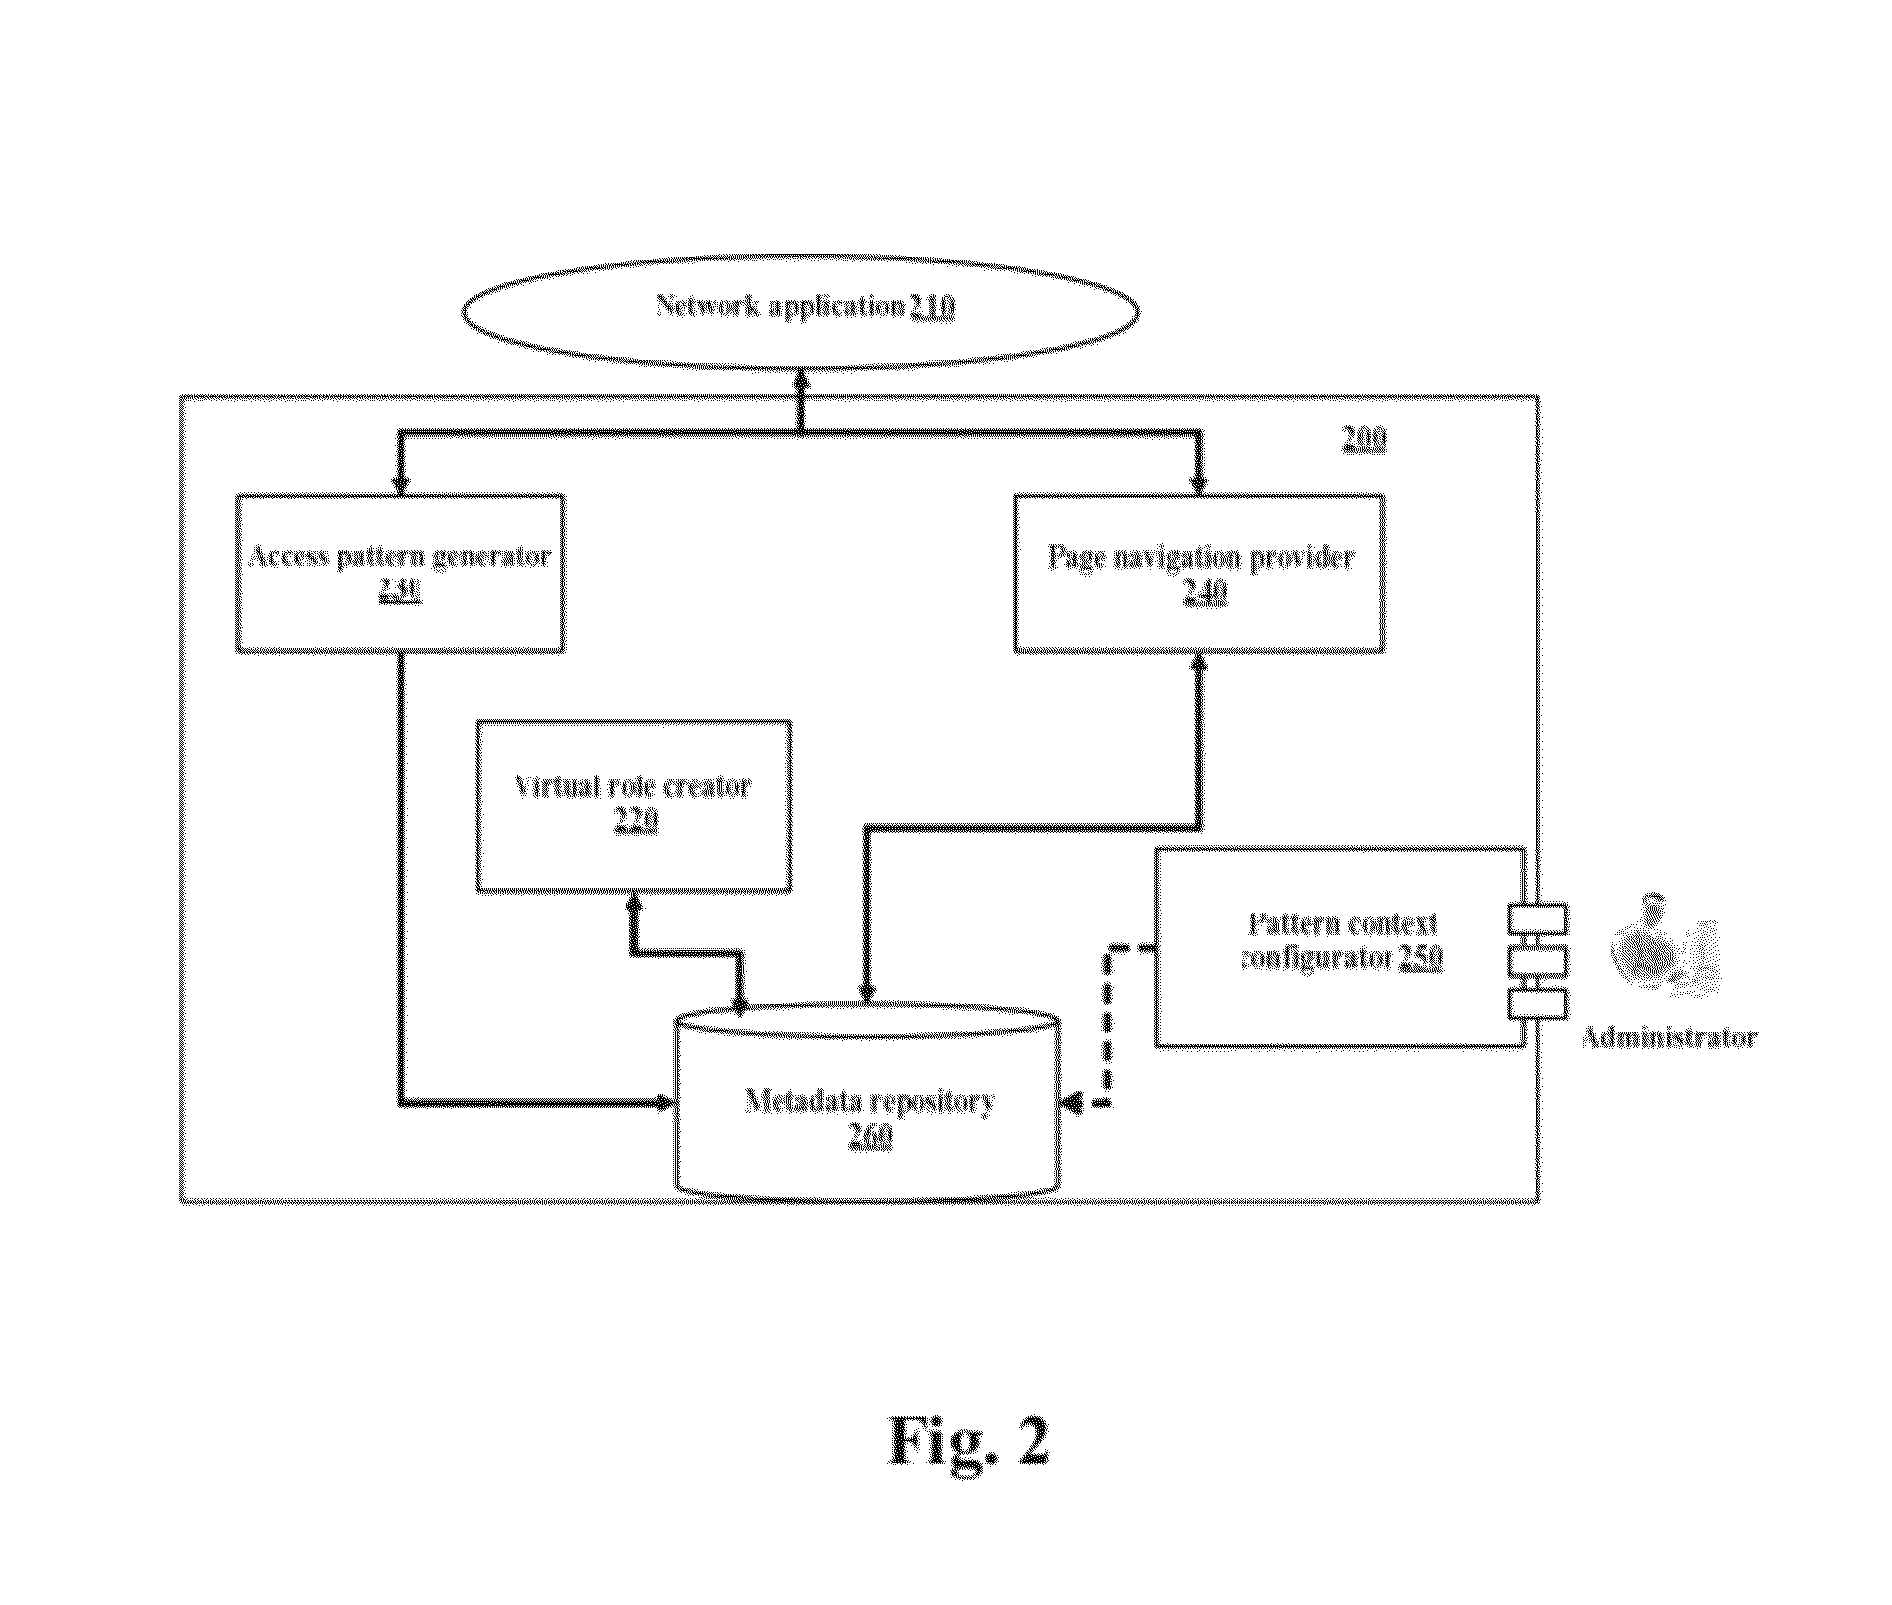 Providing Page Navigation in Multirole-Enabled Network Application